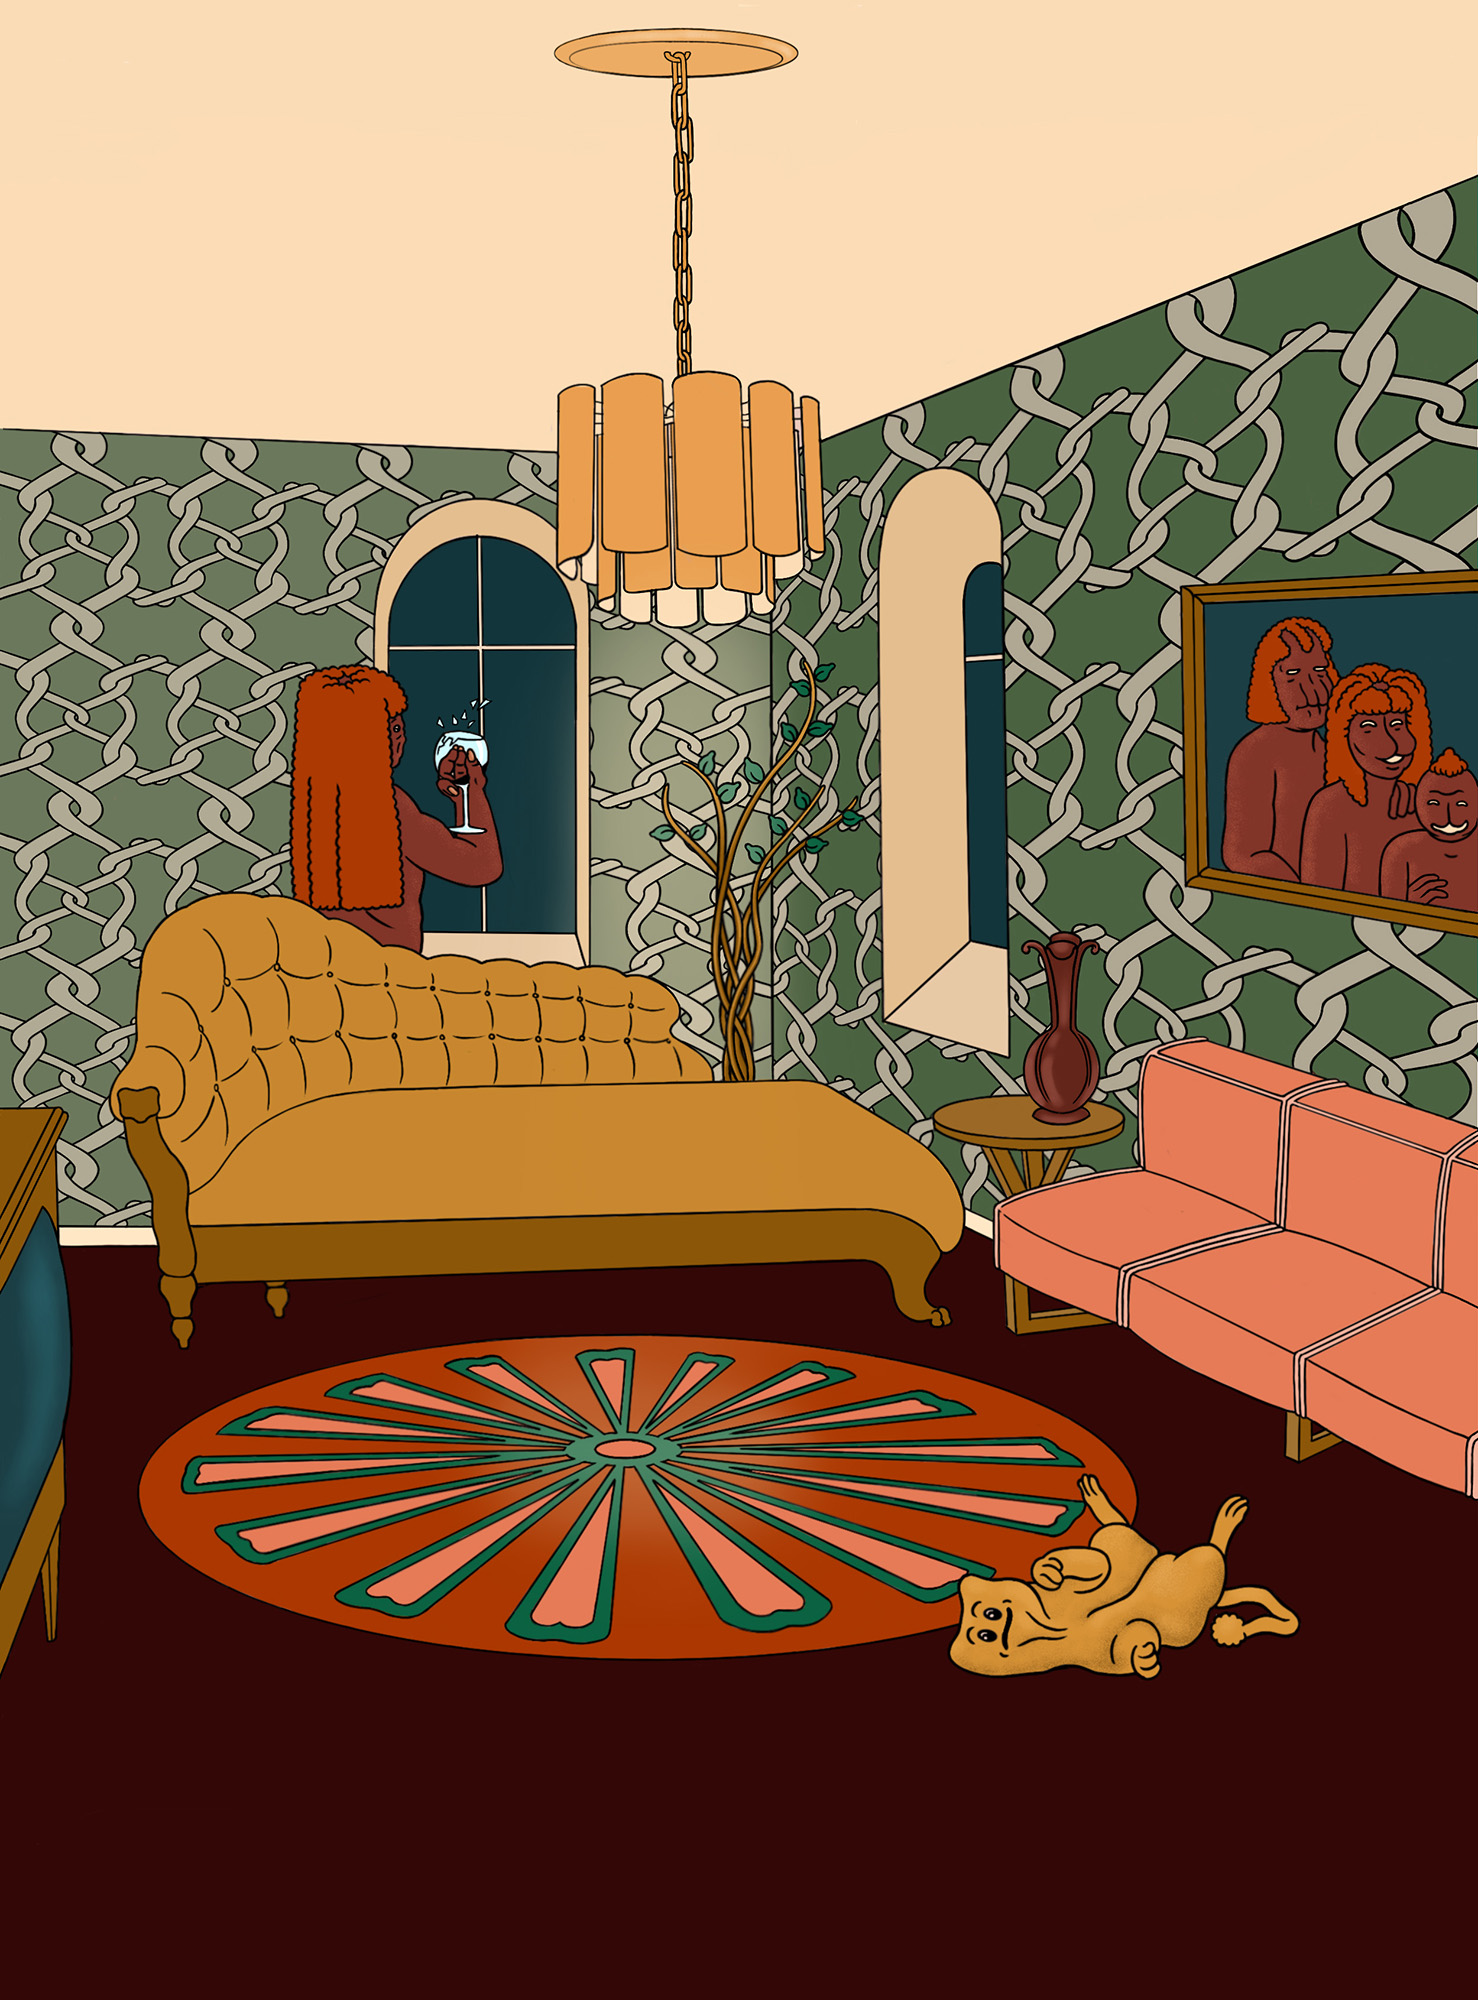 Jamiyla Lowe, Family Room, 2020. 8 x 10 in, risograph print, printed by Colour Code. Image courtesy of the artist.   